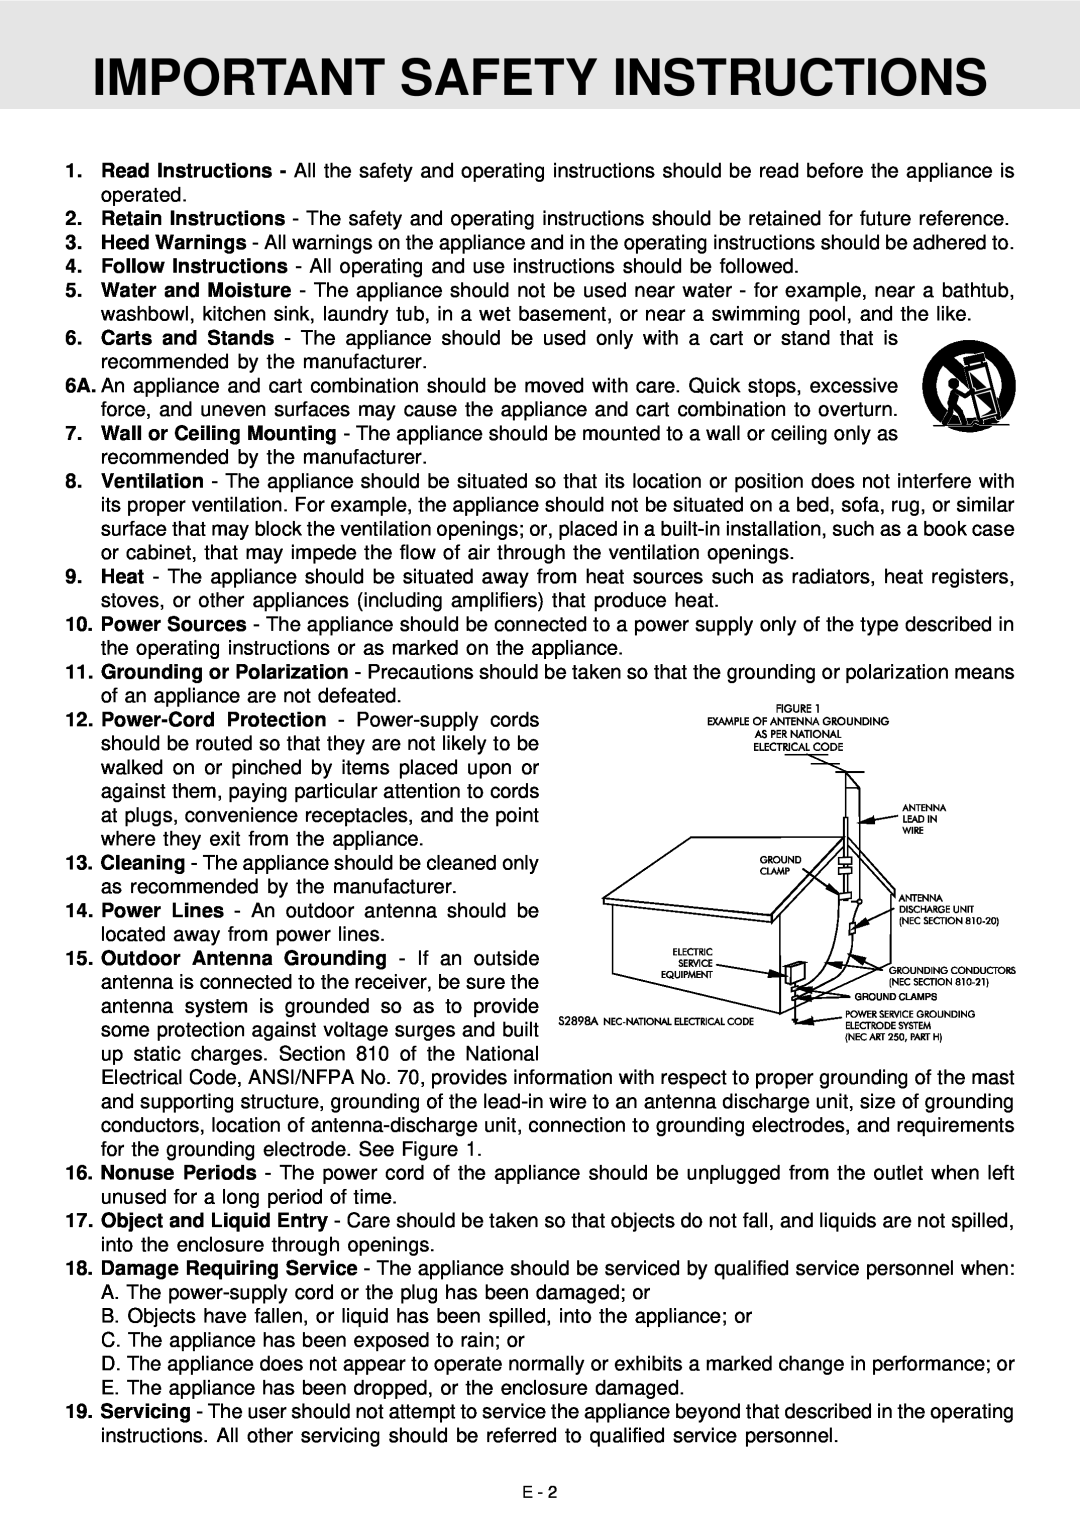 Venturer STS91 manual Important Safety Instructions, Outdoor Antenna Grounding - If an outside 